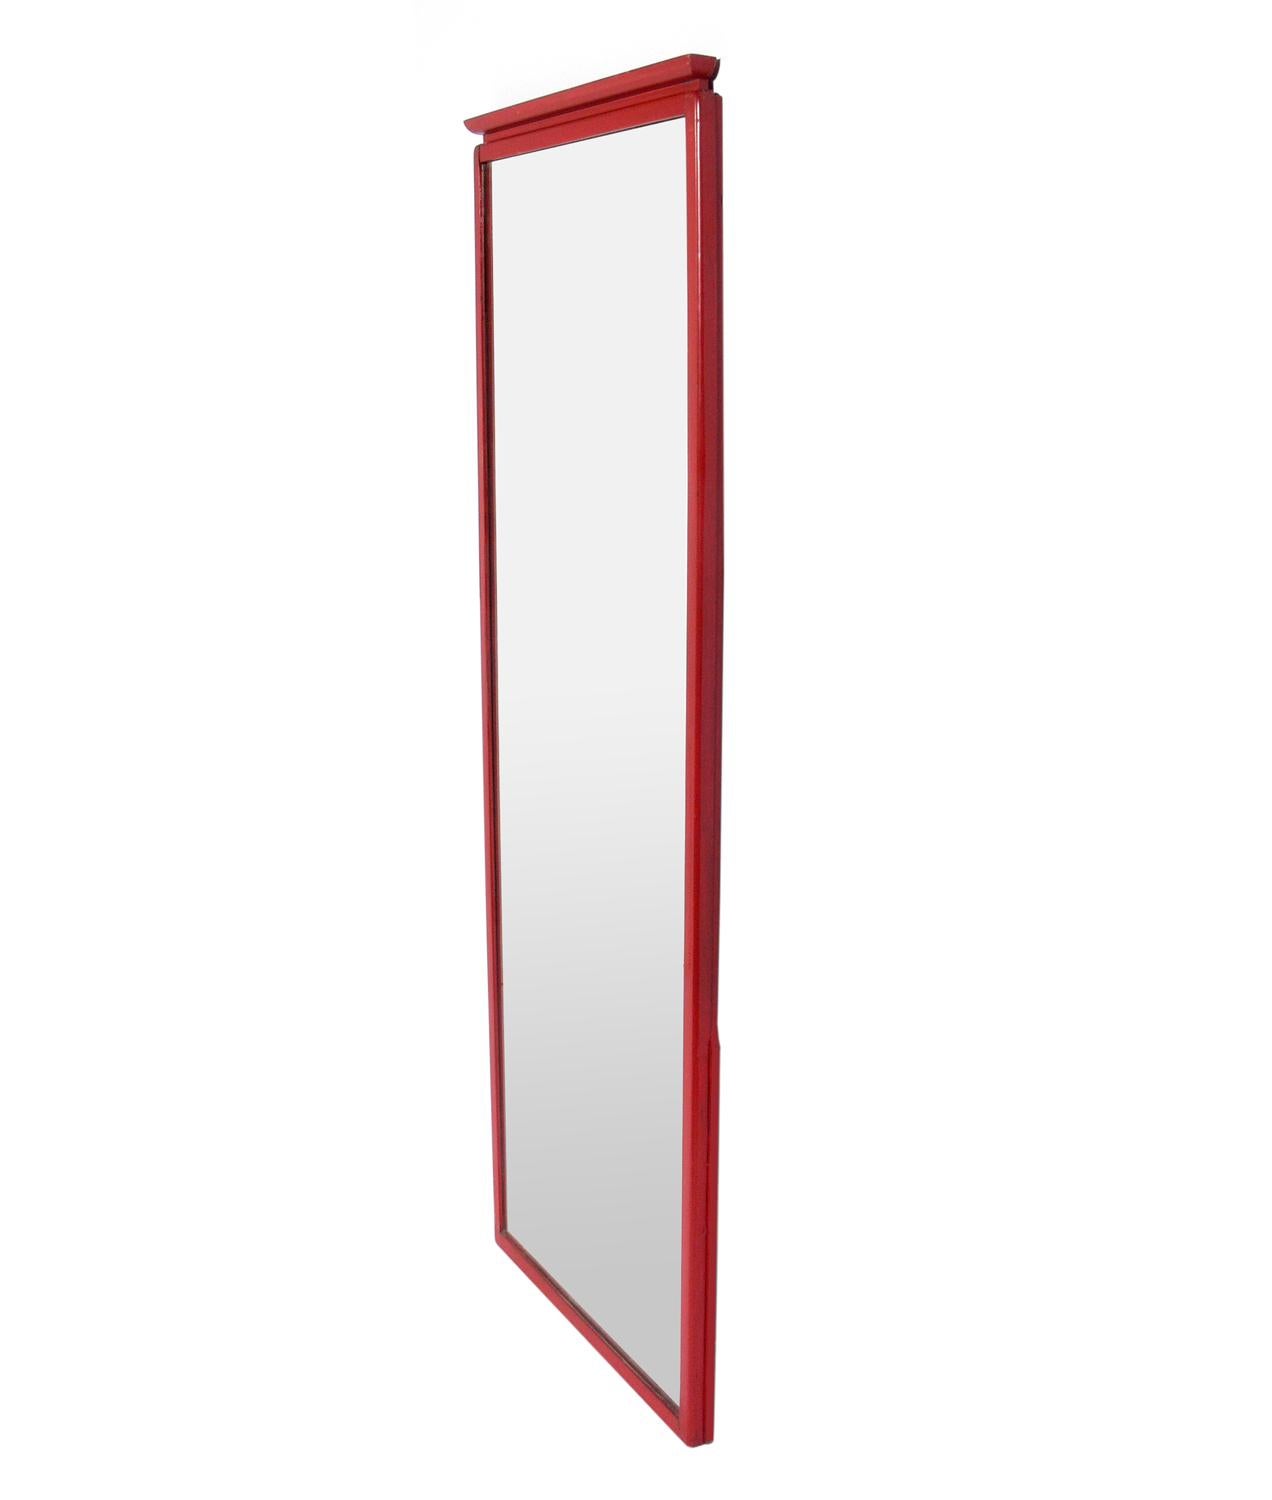 Tall Art Deco mirror with subtle Asian influences, designed by Donald Deskey for his own company, Amodec, circa 1930s. This piece is currently being refinished and can be completed in your choice of colors. The price noted includes refinishing in